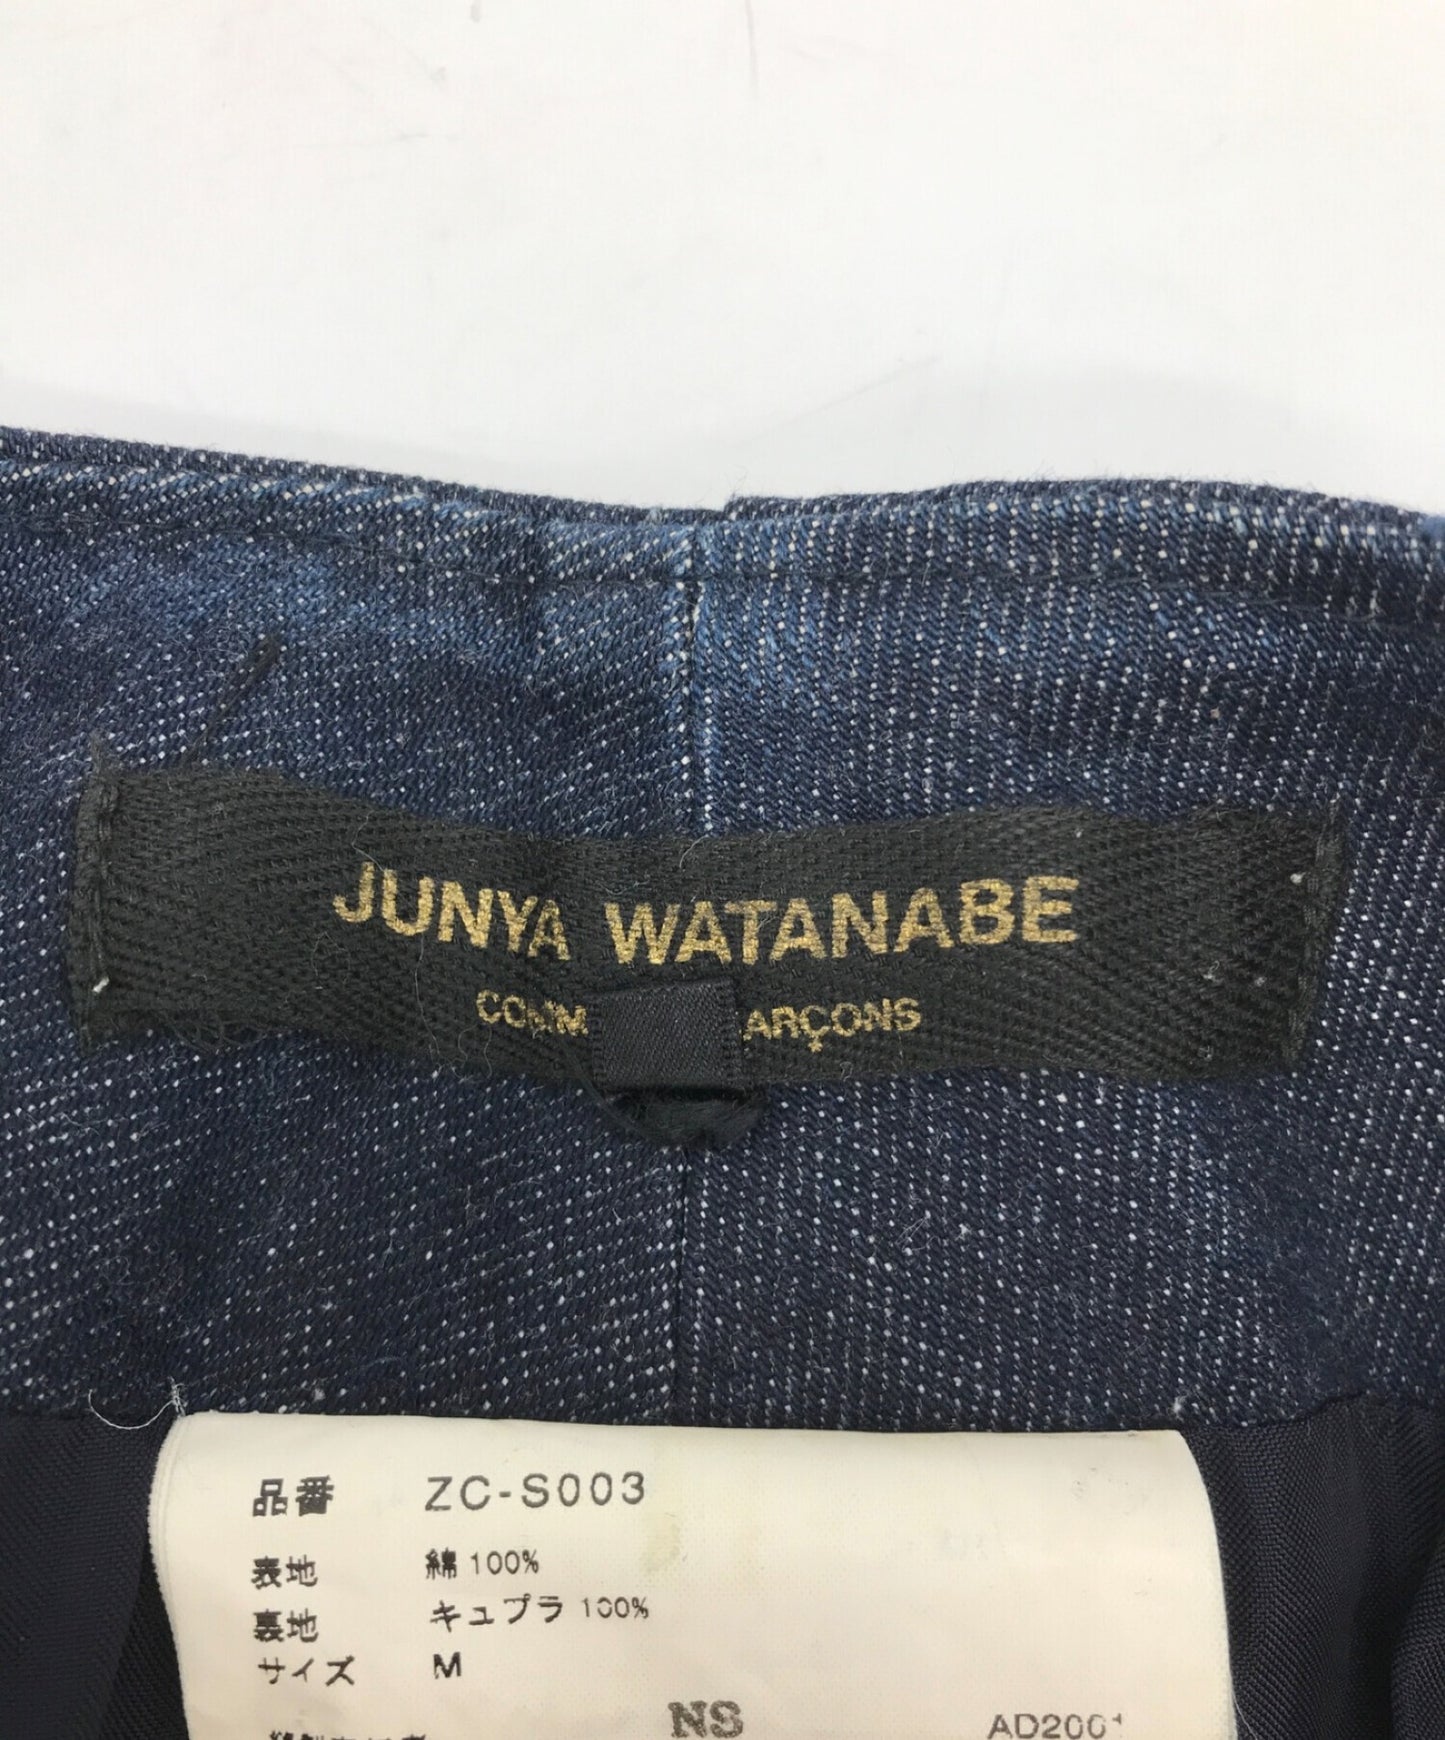 [Pre-owned] JUNYA WATANABE COMME des GARCONS Denim Skirts Skirts ZC-S003